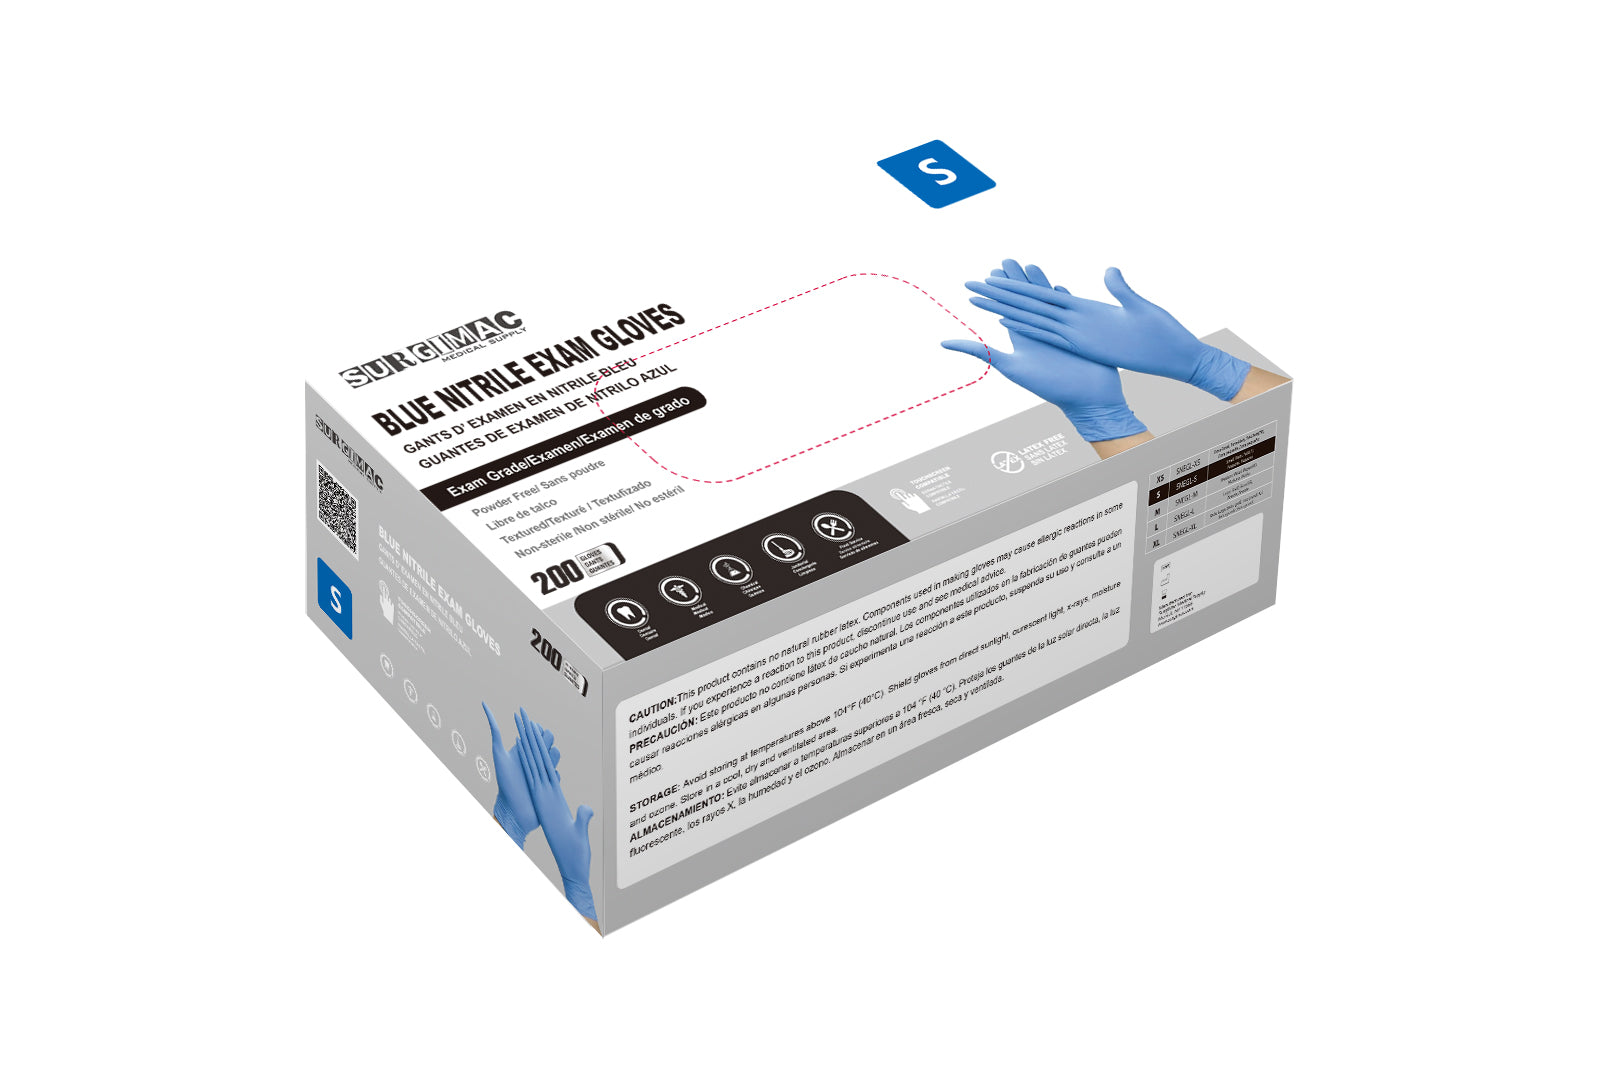 Medical Nitrile Examination Gloves MaxSoft: Comfortable, Flexible, and Durable